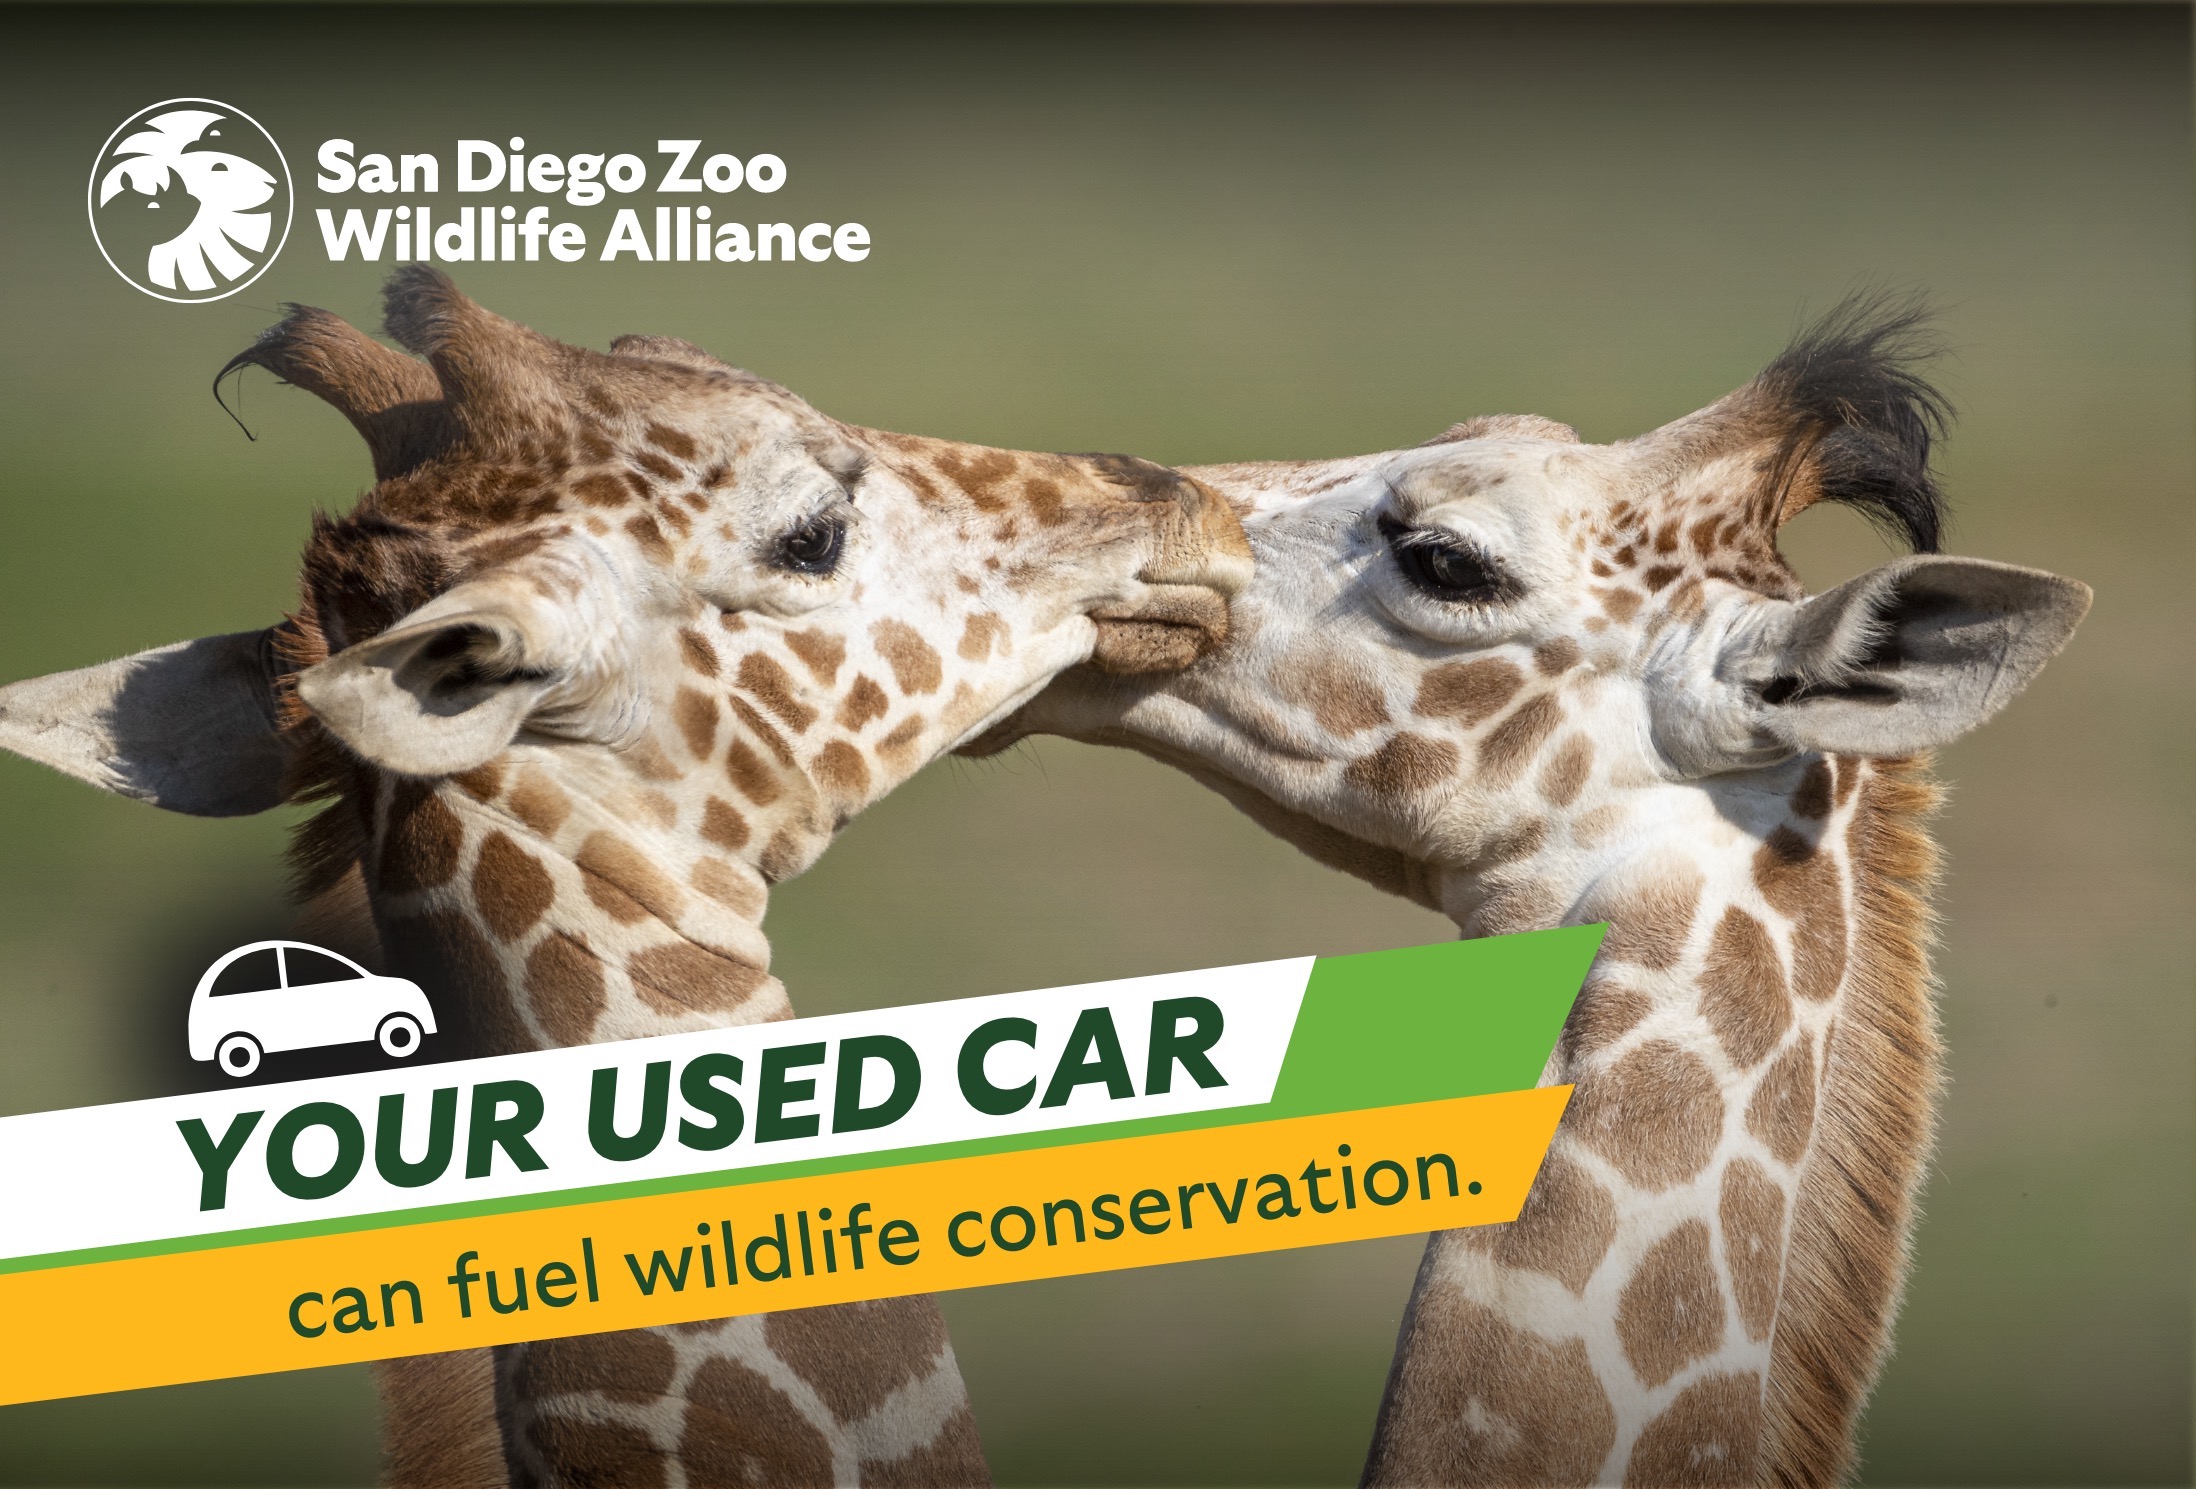 YOUR USED CAR  can fuel wildlife conservation.